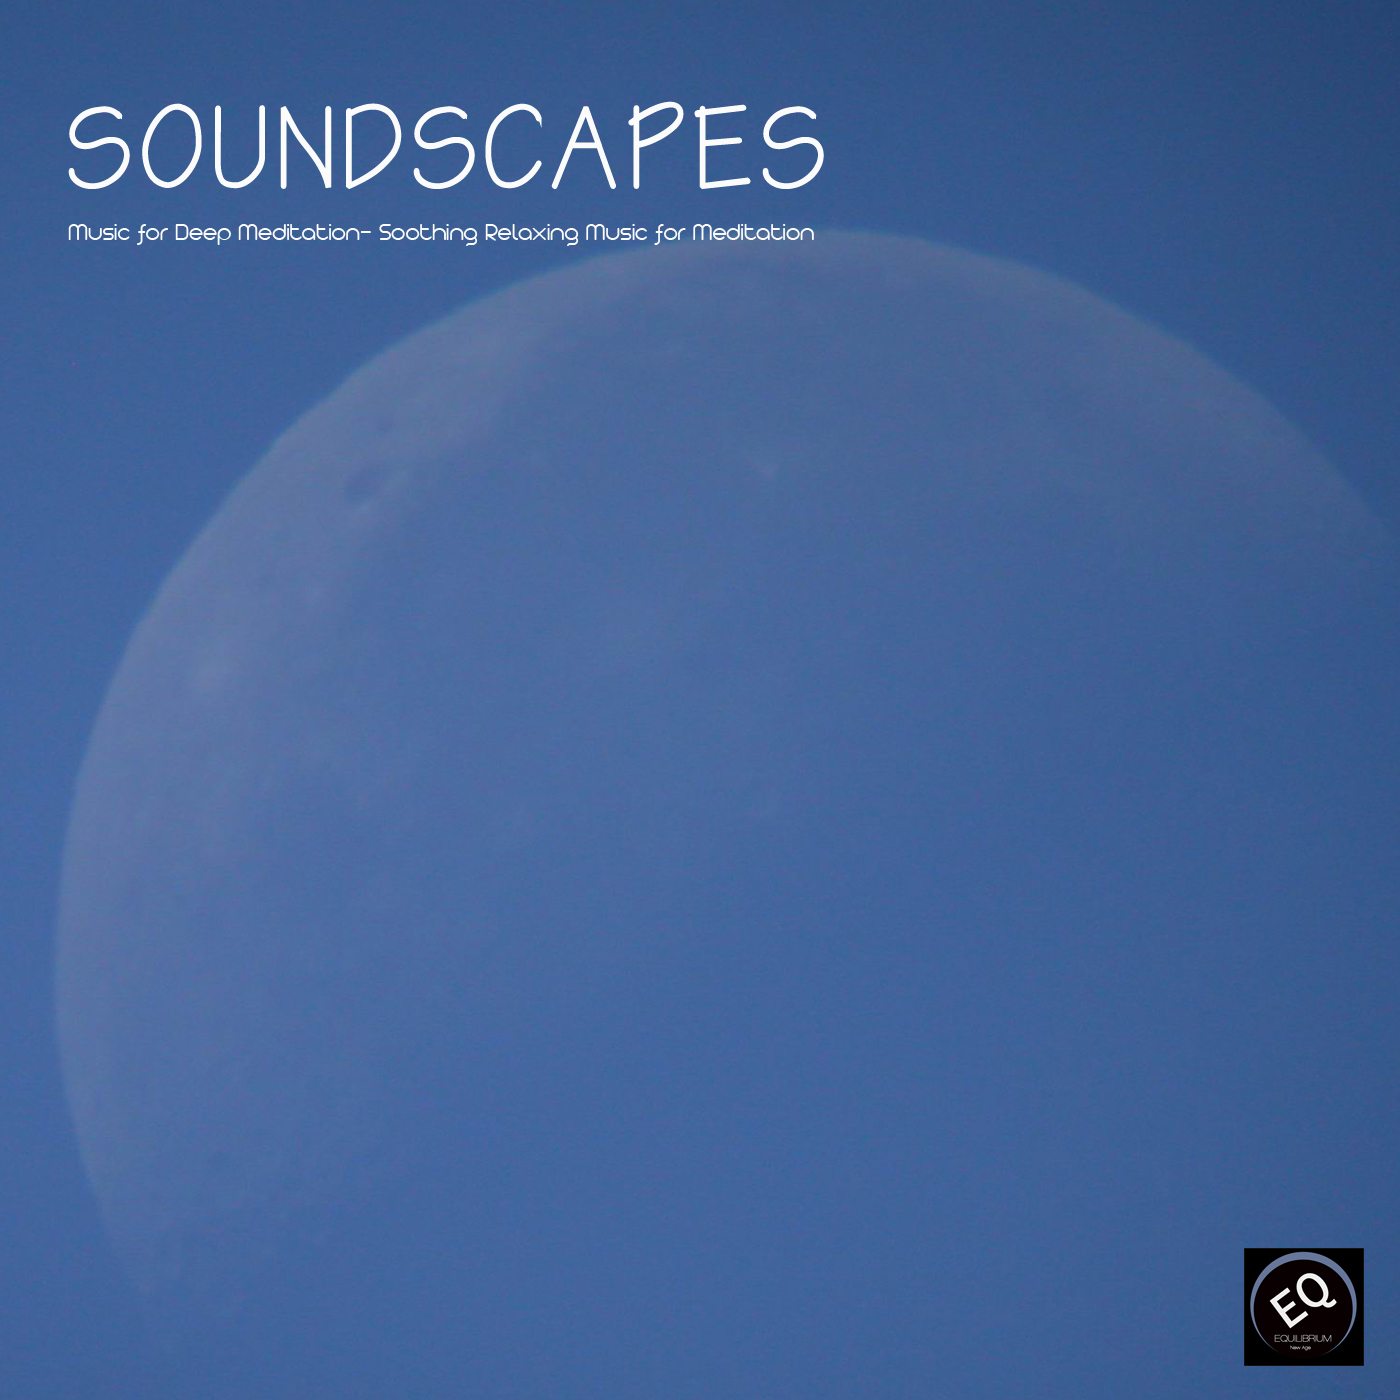 Serenity - Soundscape with Nature Sound